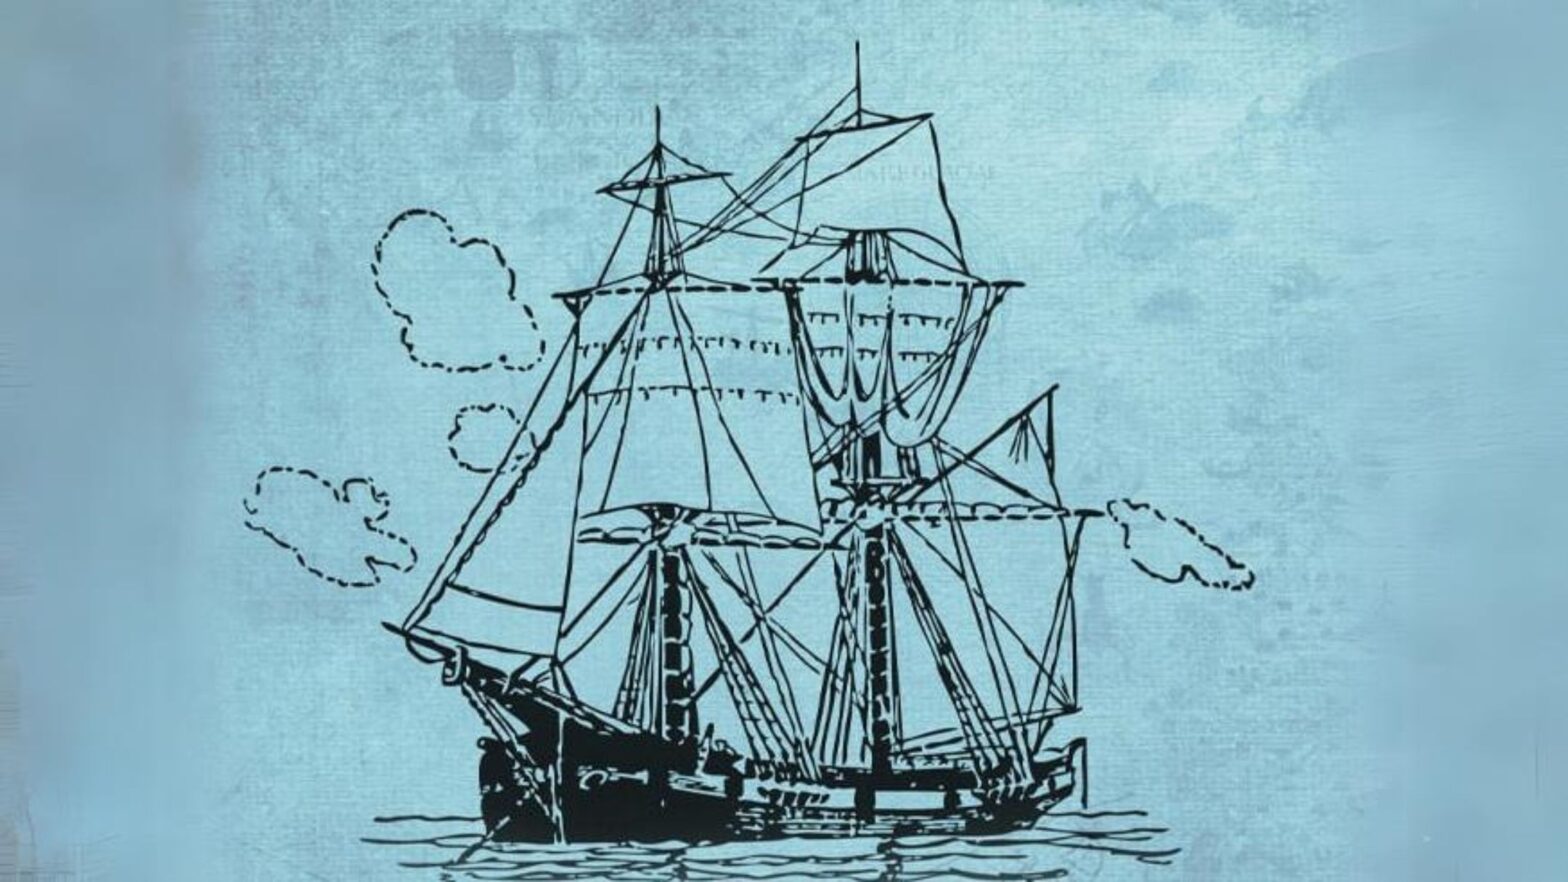 An illustration of a black ship sailing on a blue background.